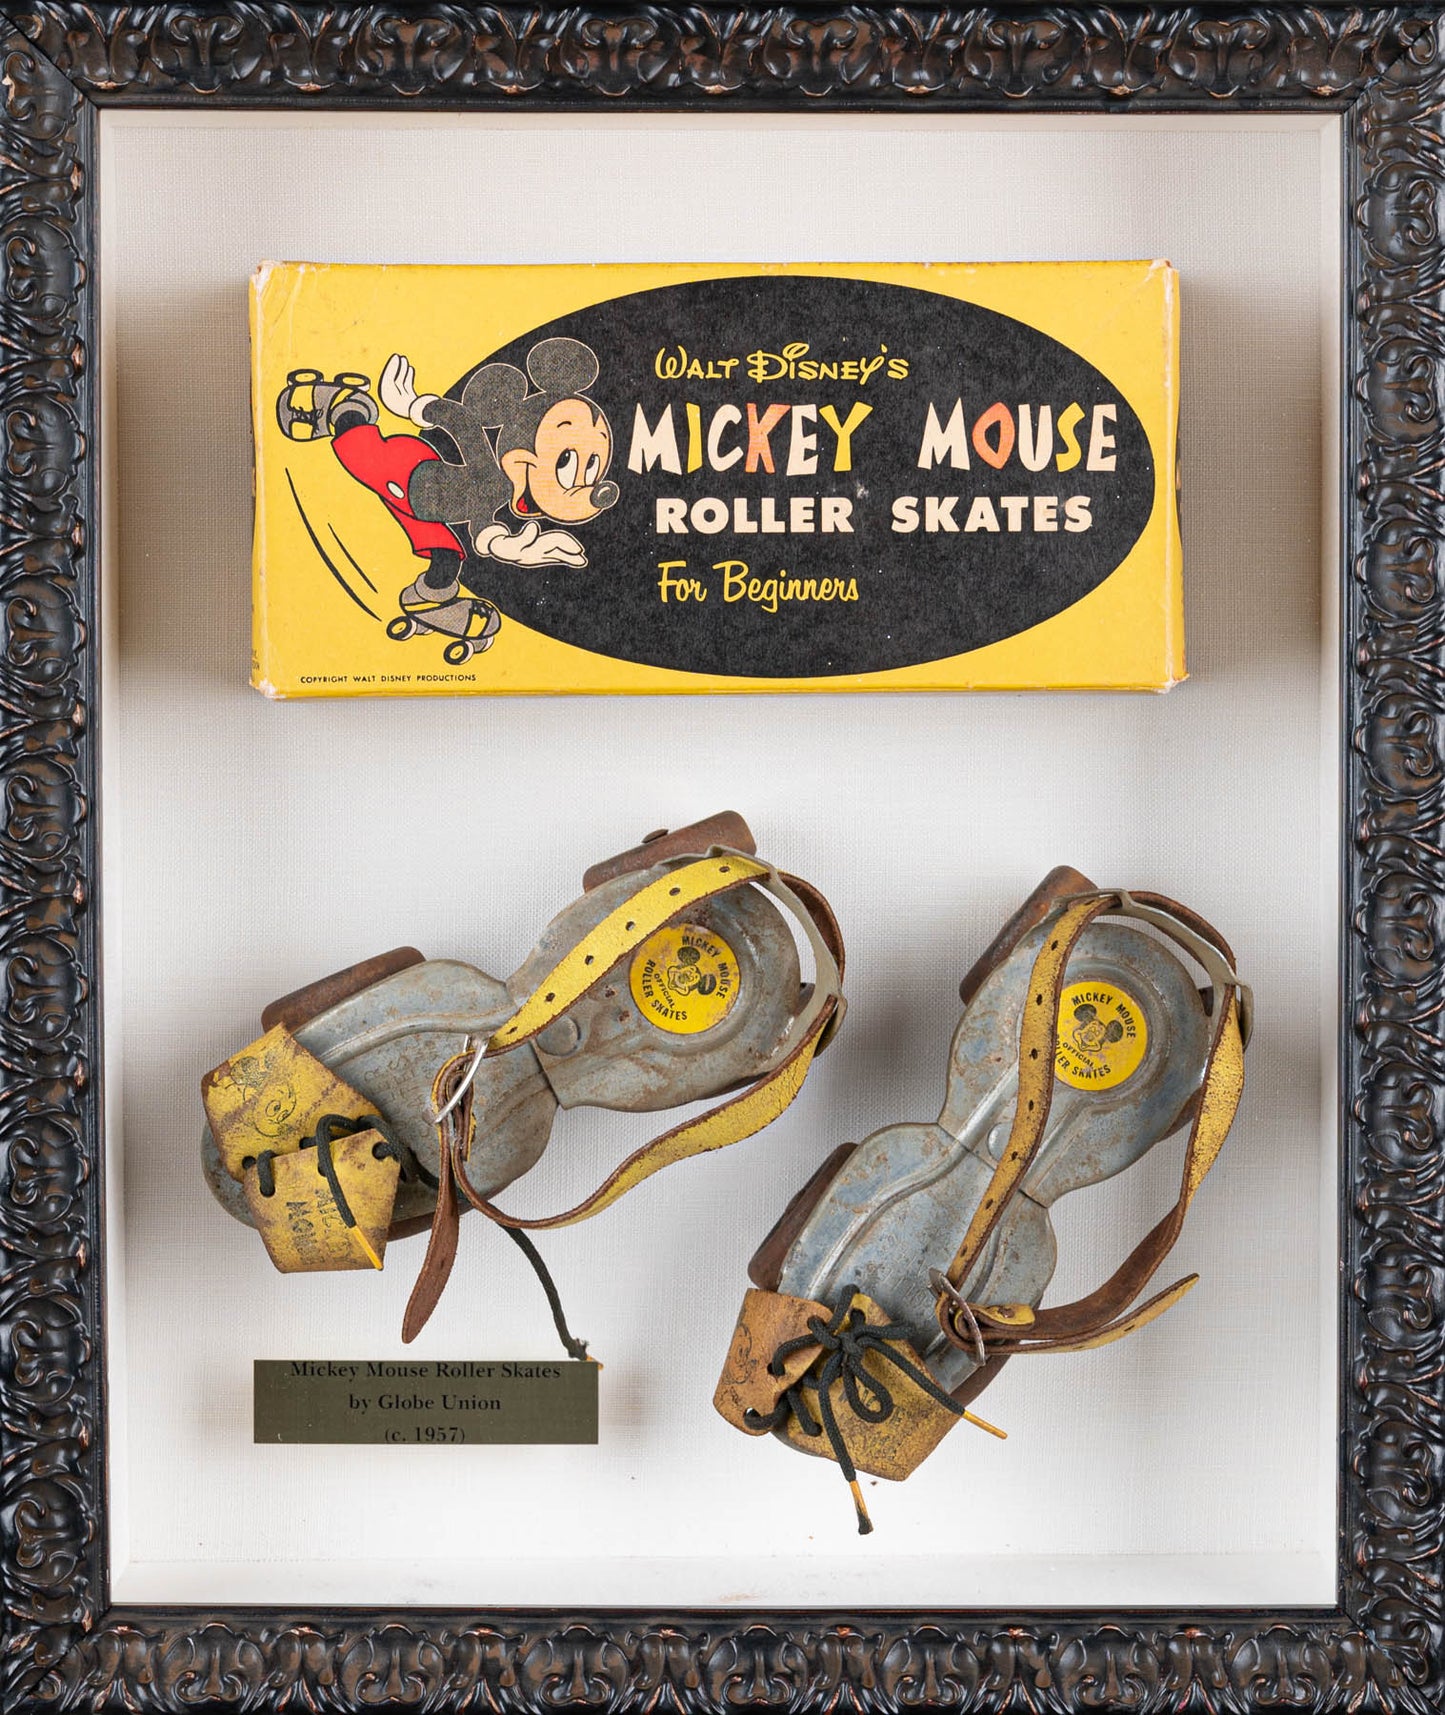 Mickey Mouse Roller Skates by Globe Union  c.1957